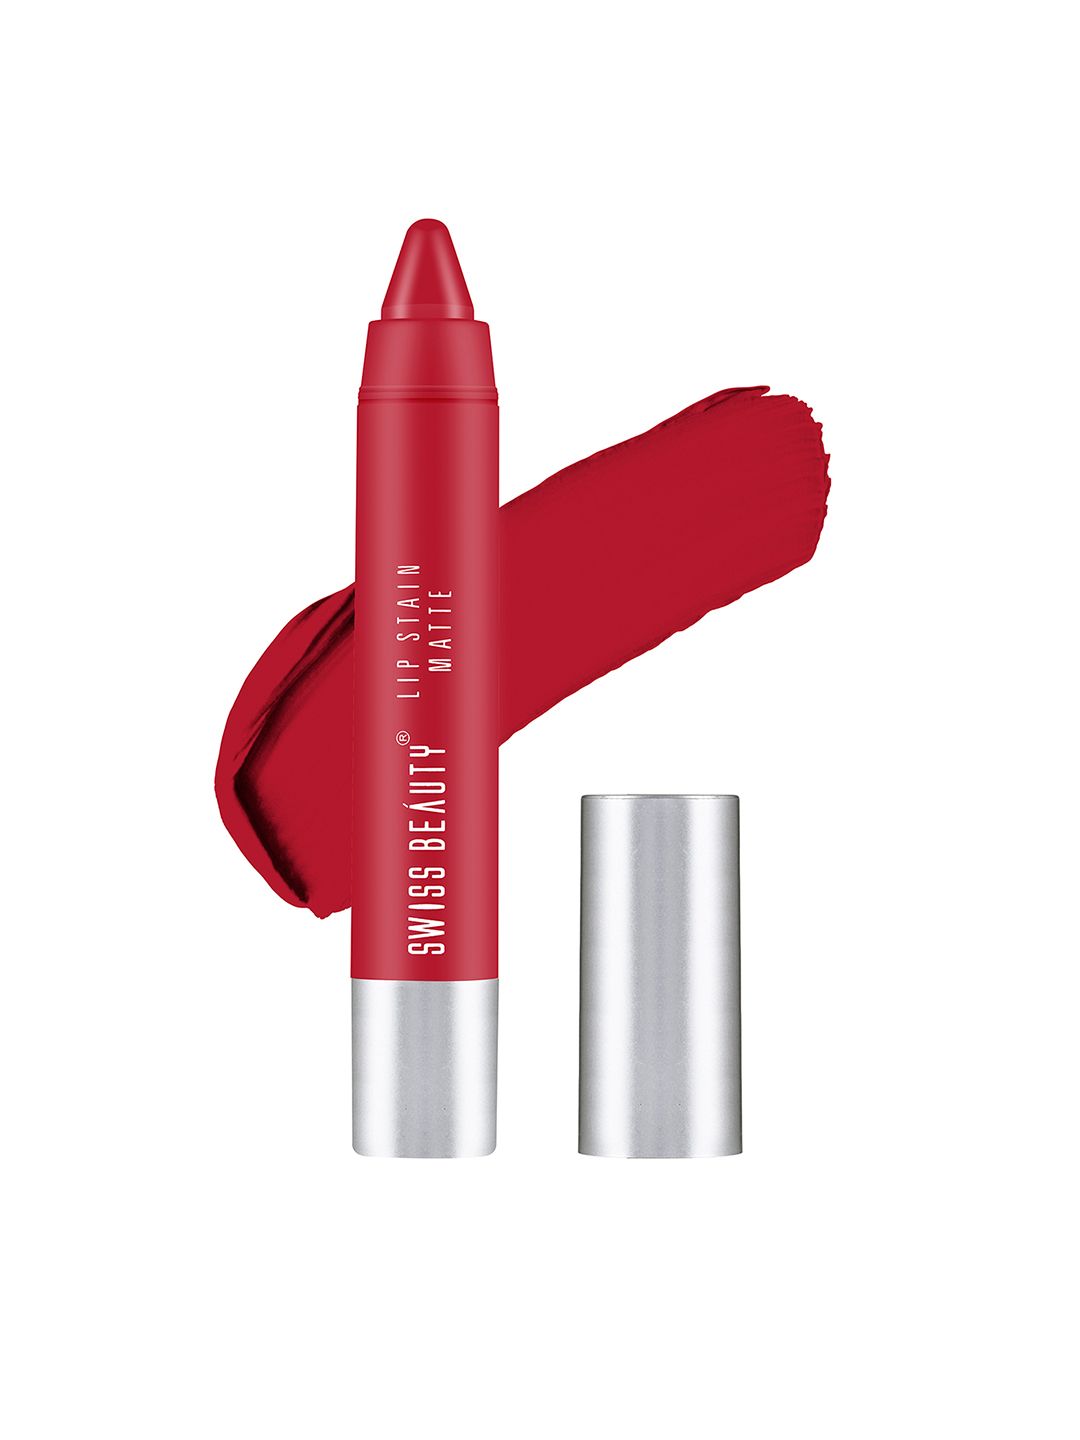 SWISS BEAUTY Lip Stain Matte Lipstick - Coral Red Price in India